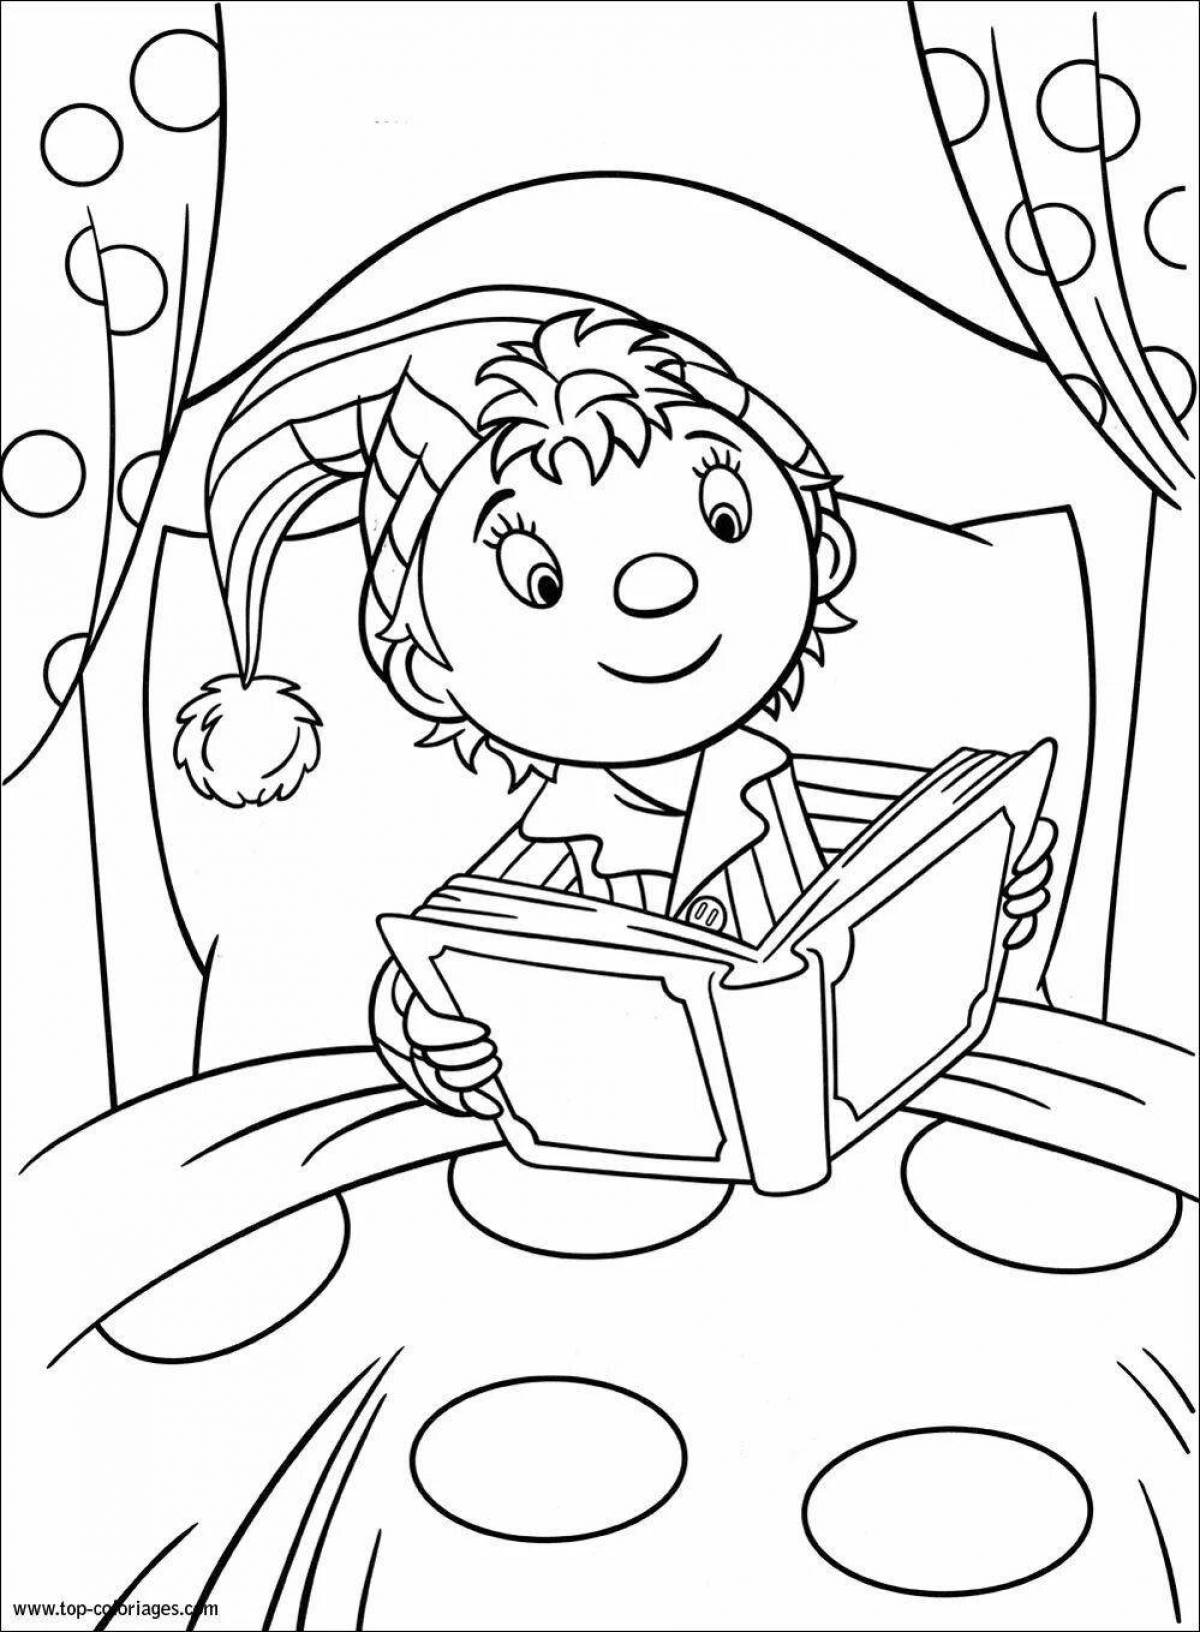 Fun coloring page for freckles and boils